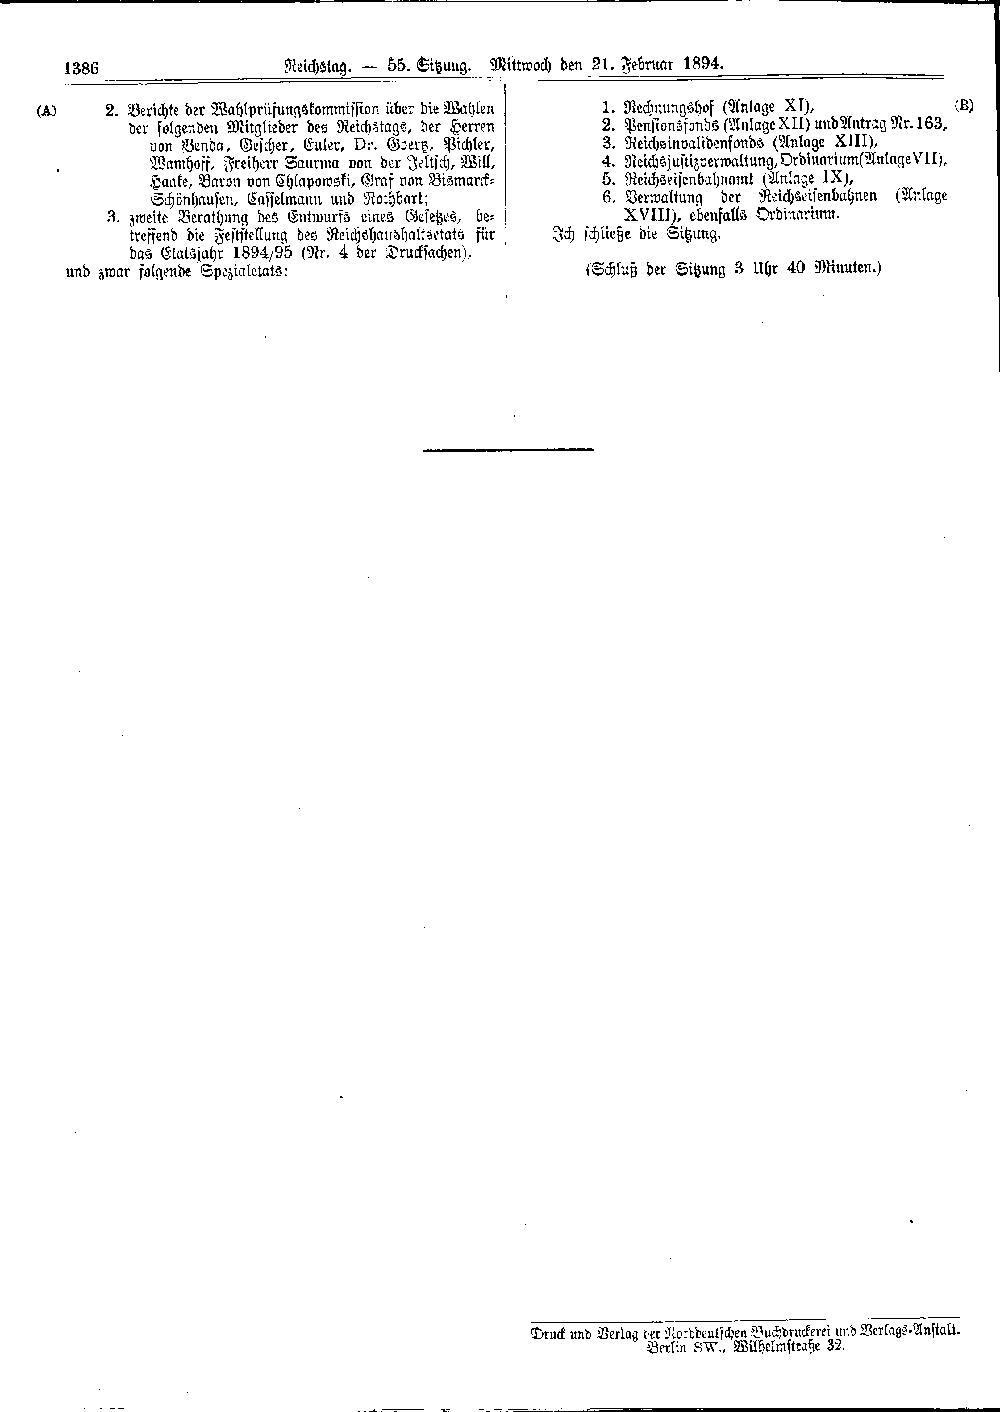 Scan of page 1386